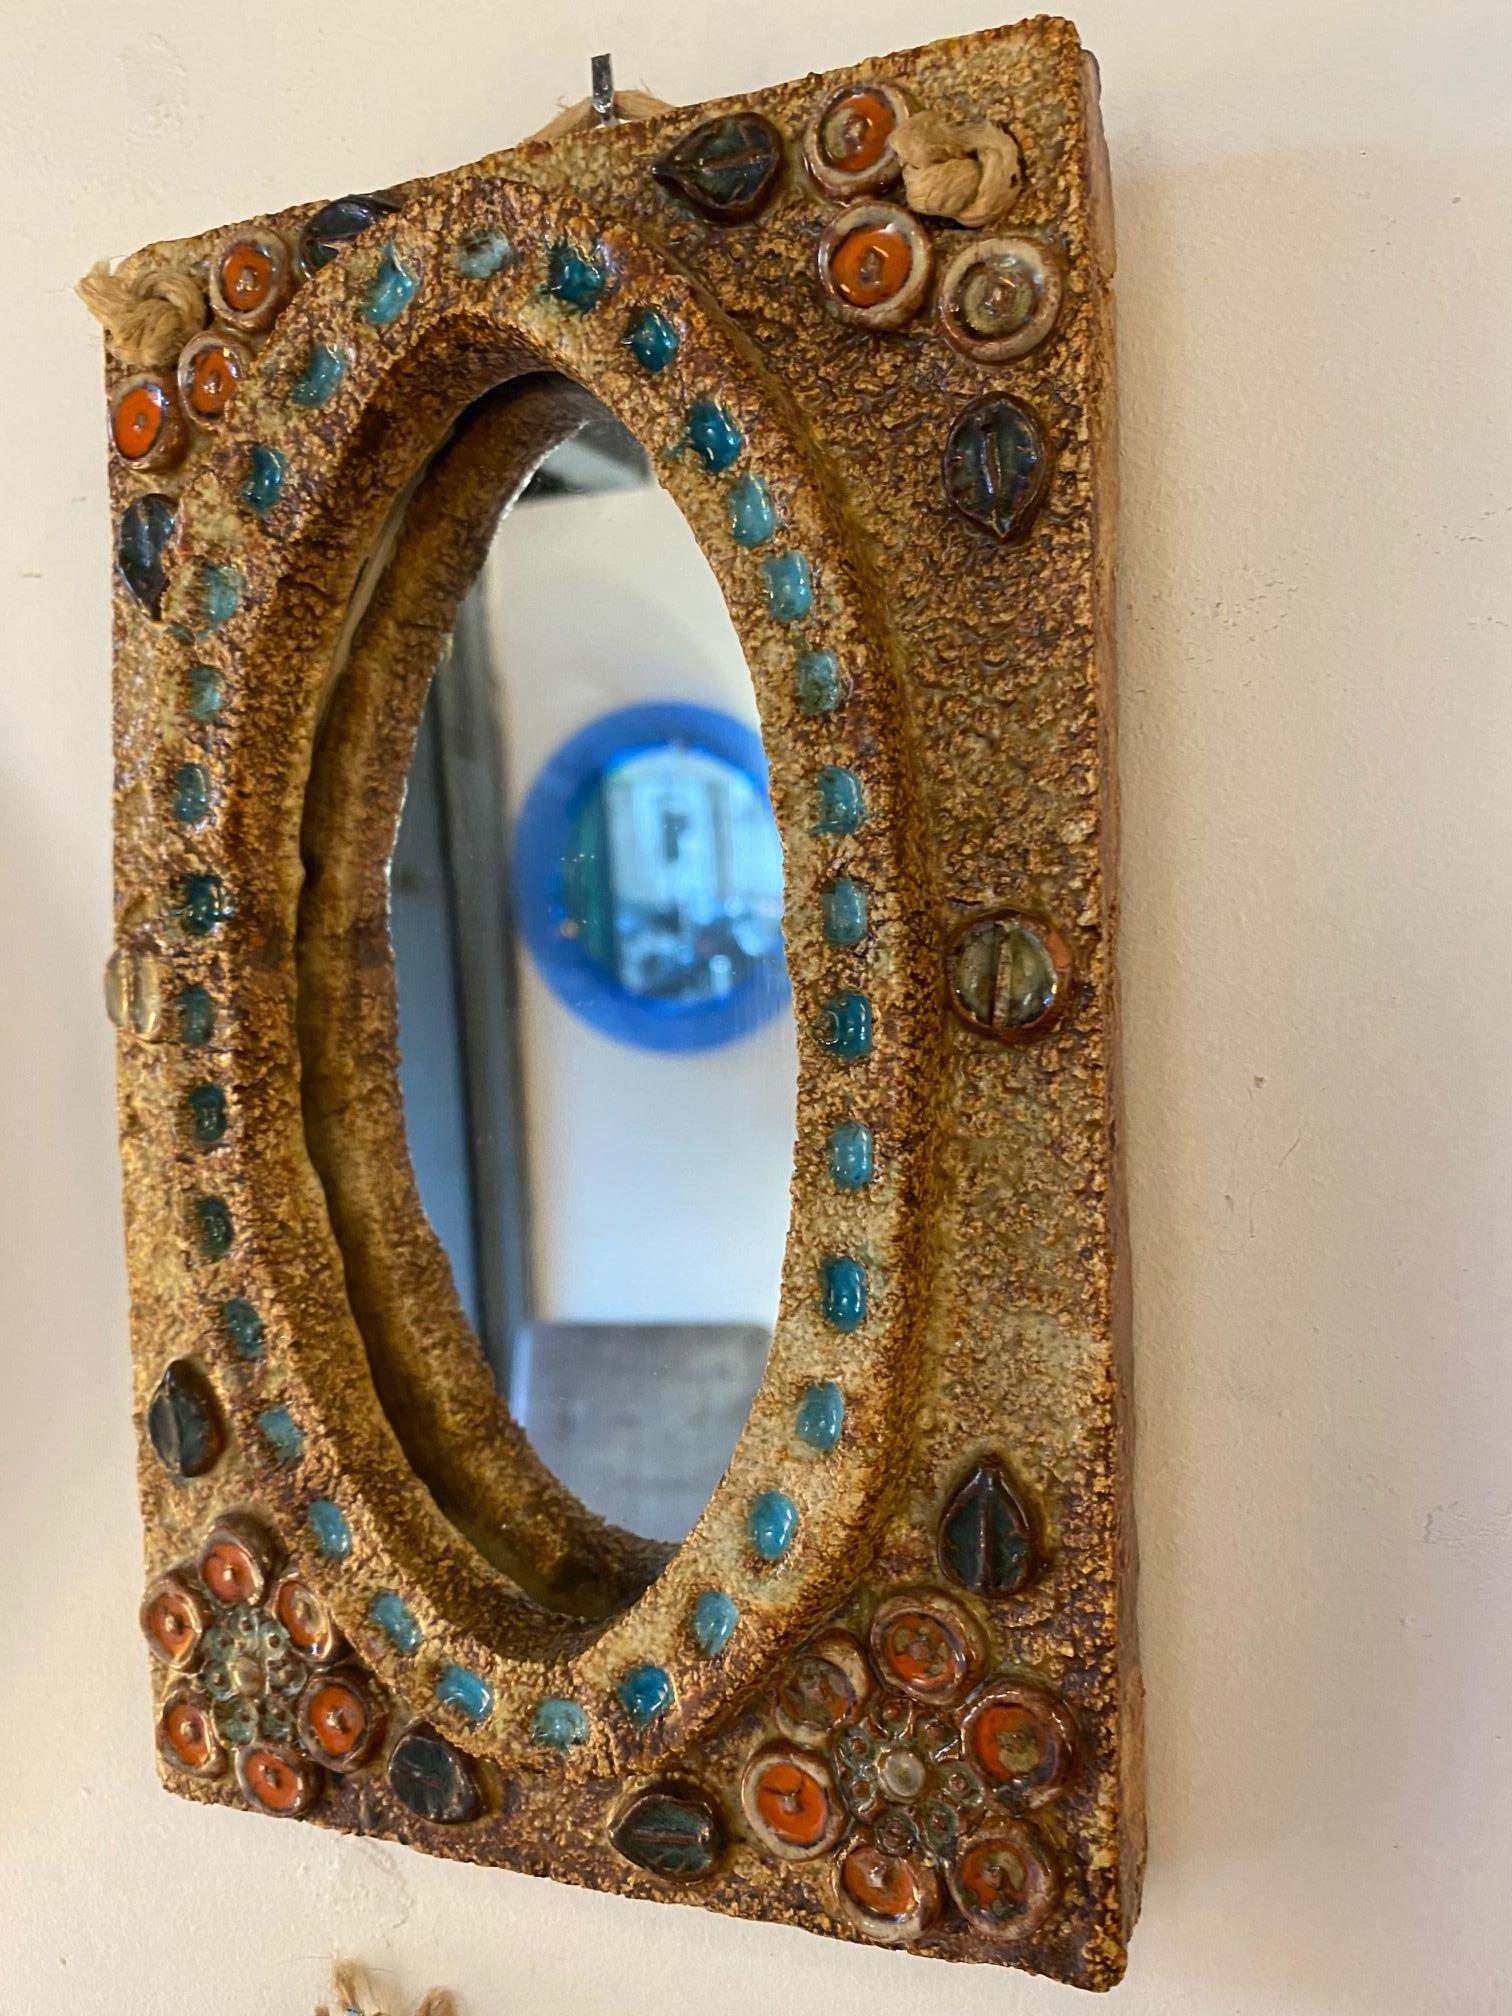 Ceramic mirror, France, Vallauris, 1960s
Attibuted to Les Argonautes (Frédérique Bourguet and Isabelle Ferlay), French workshop created in Vallauris, south of France, in 1953 and active until the death of Federique Bourguet in 1997.